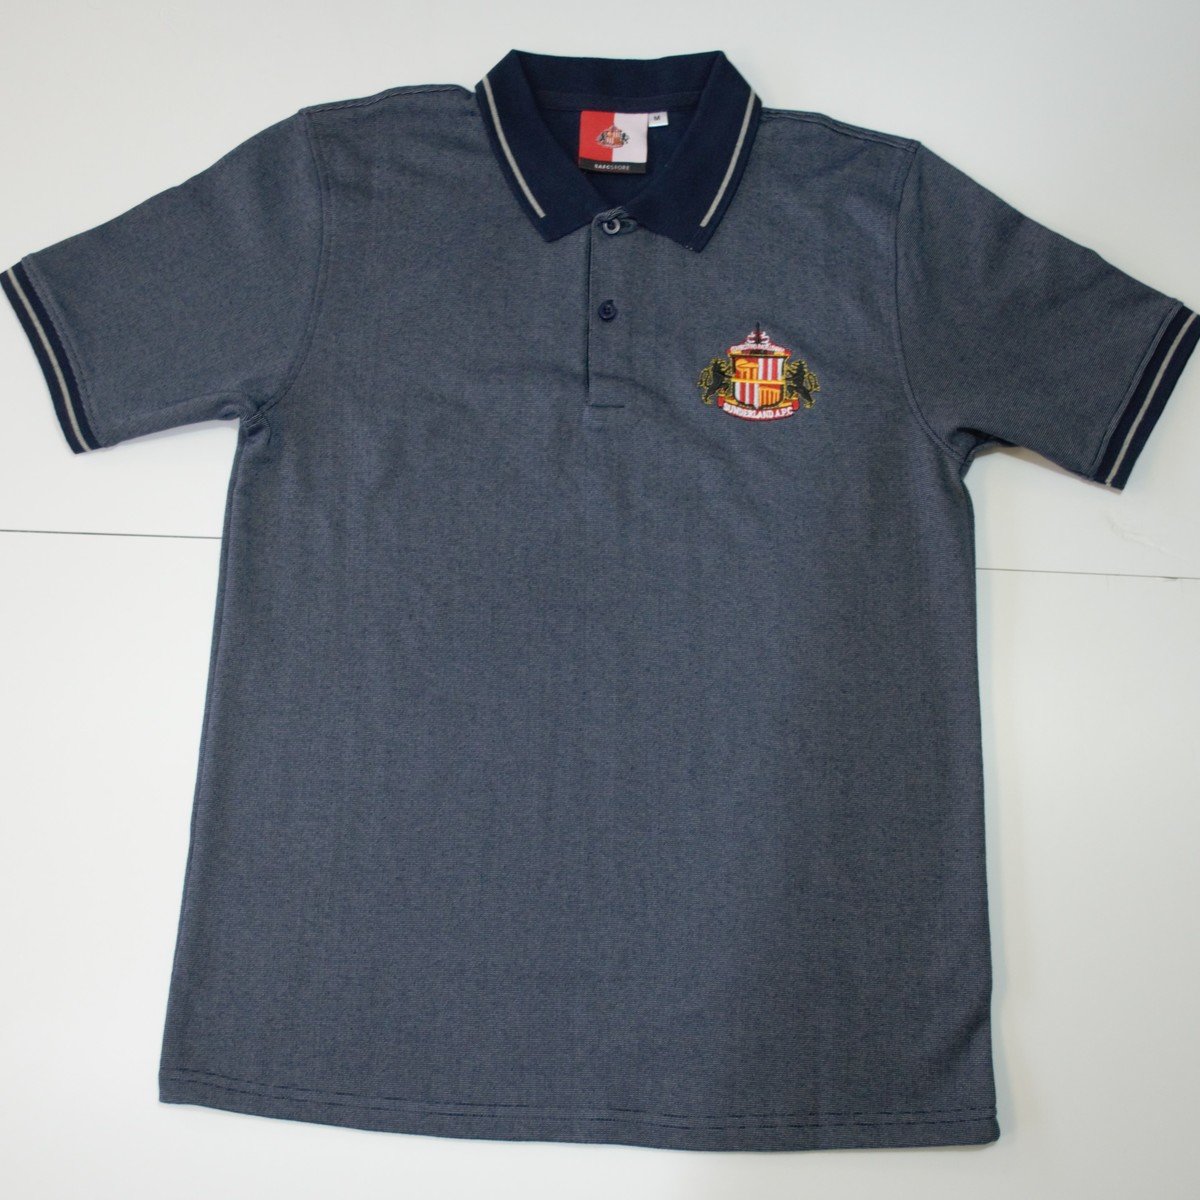 LINKS POLO SAFCStore - Sunderland AFC Official Merchandise